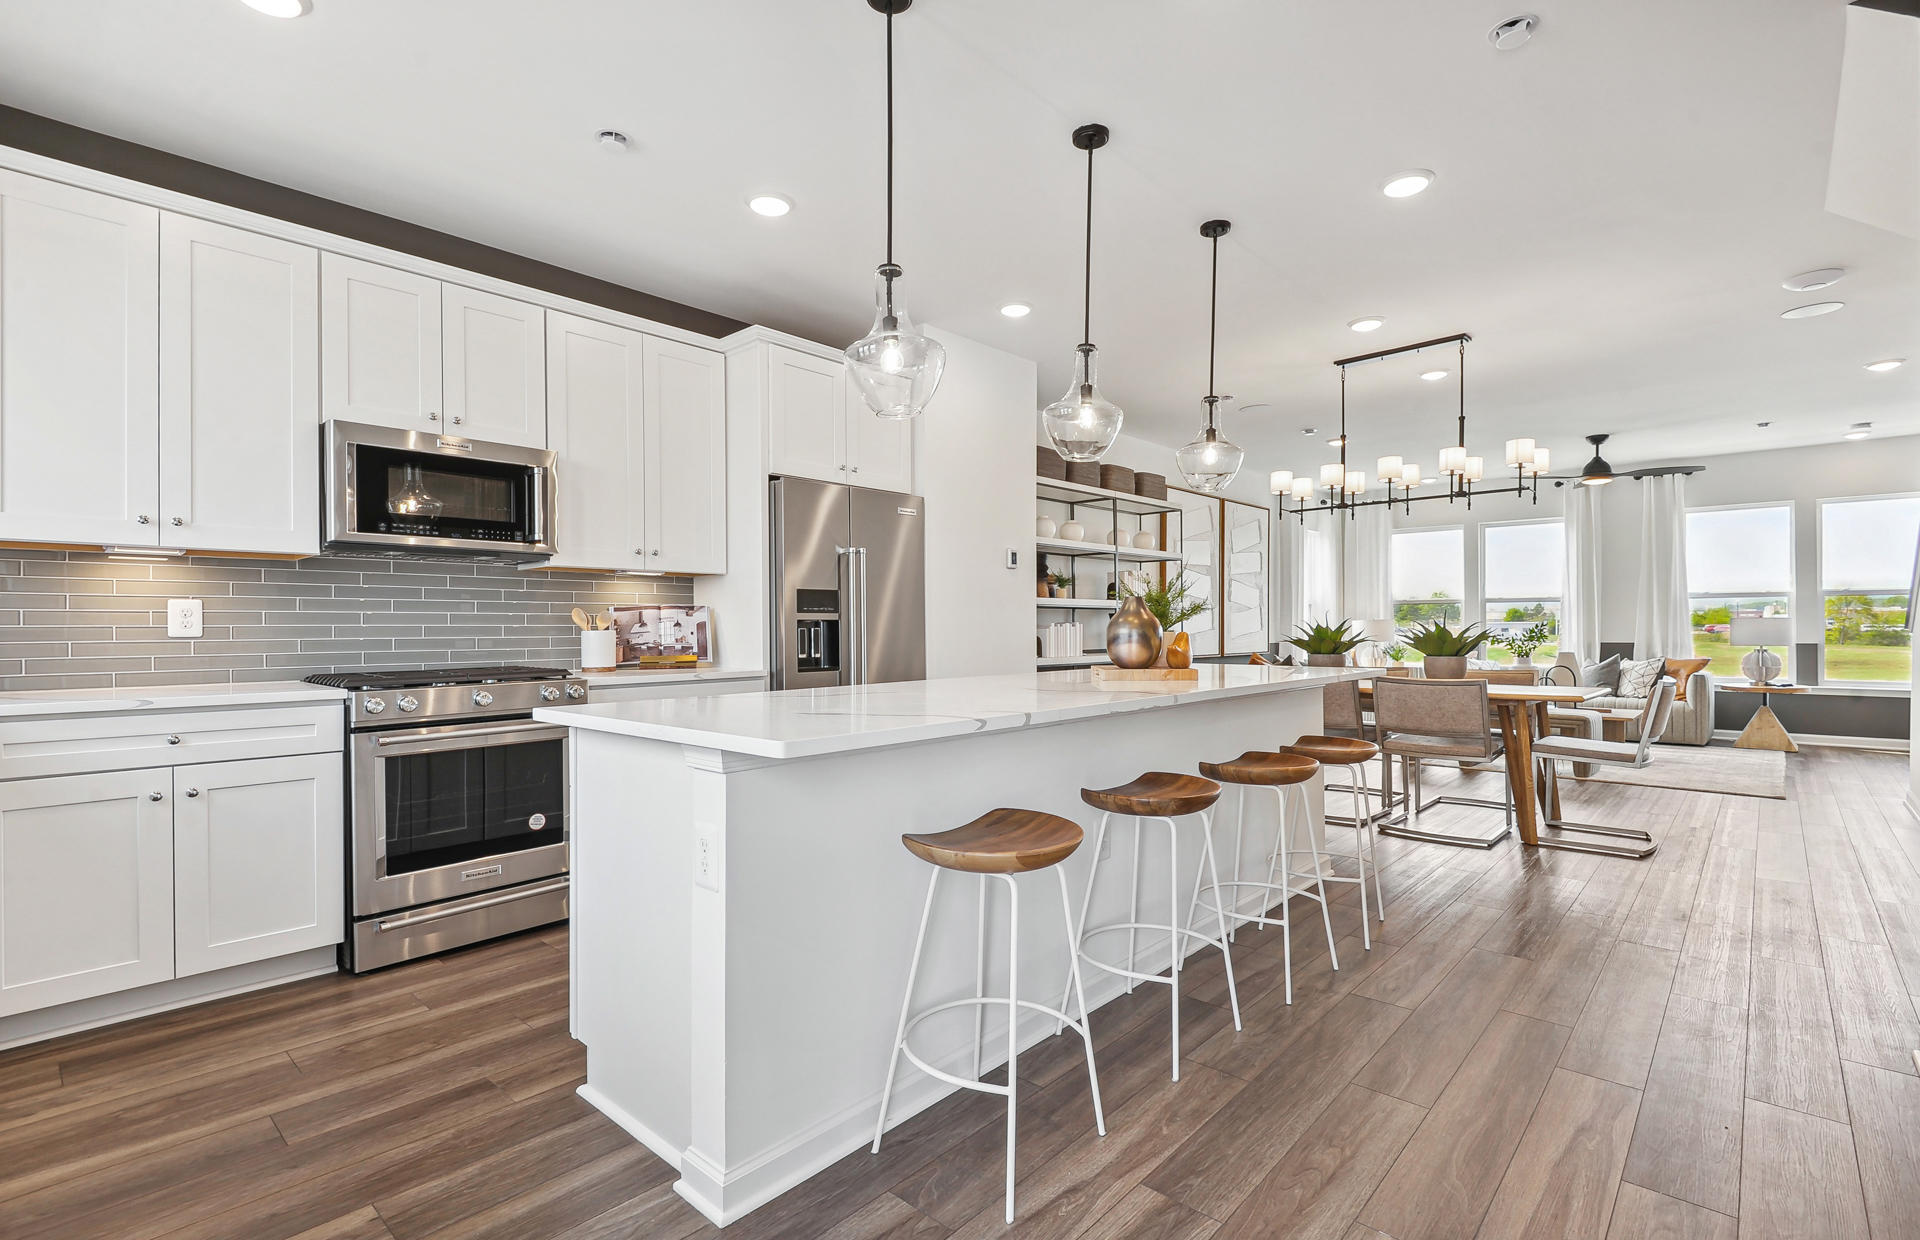 Image 6 | Crossroads Village by Pulte Homes